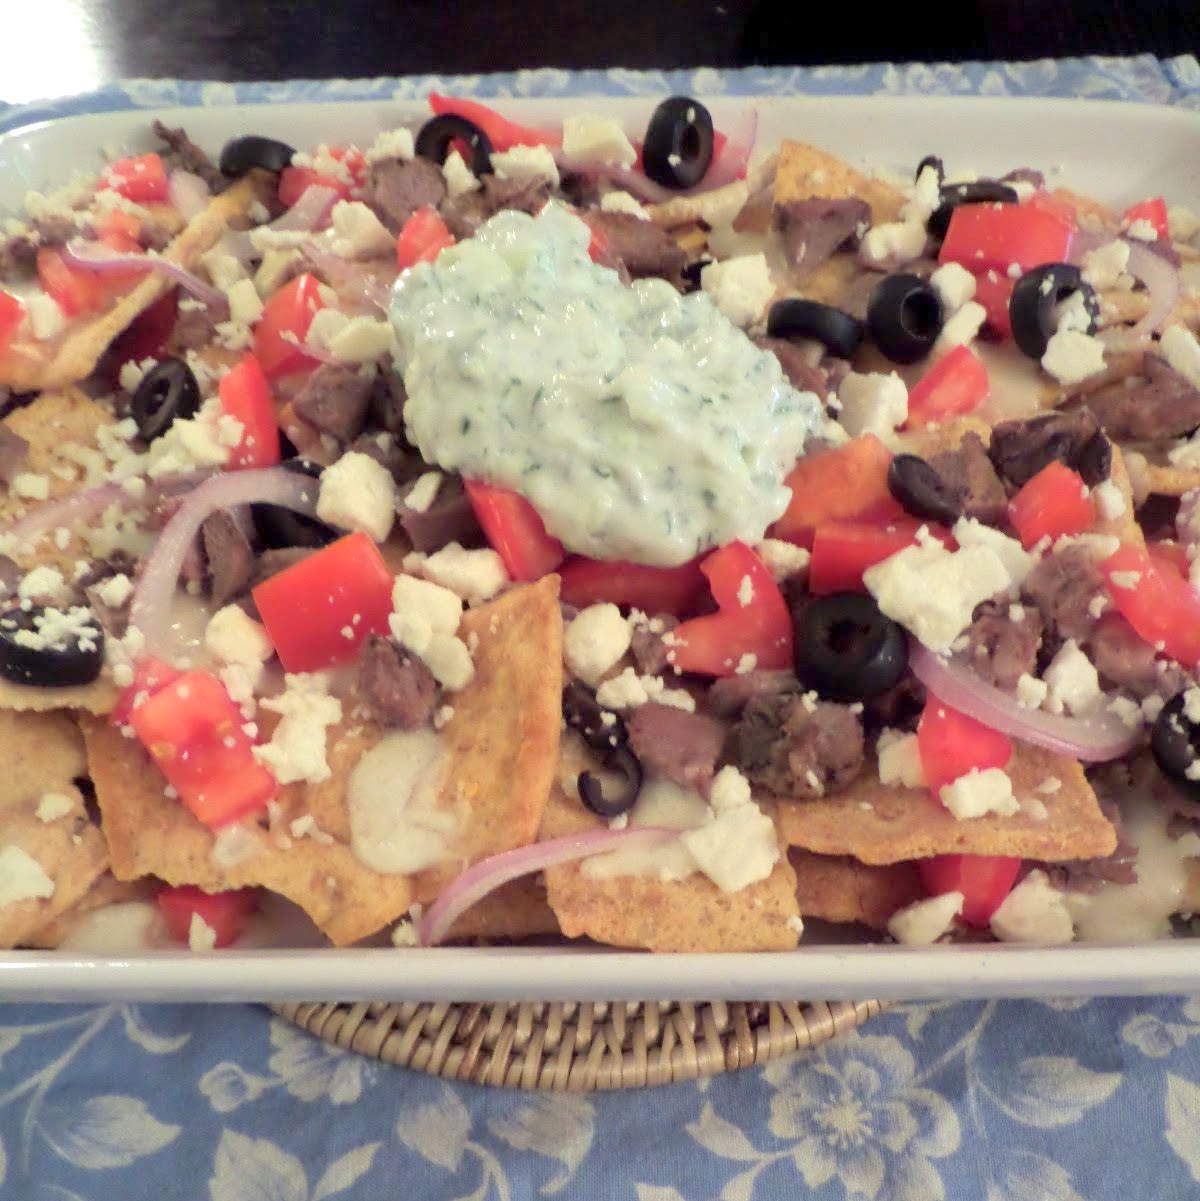 Greek Nachos:  Nachos with a Greek twist.  Pita chips topped with lamb, olives, tomatoes, and feta.